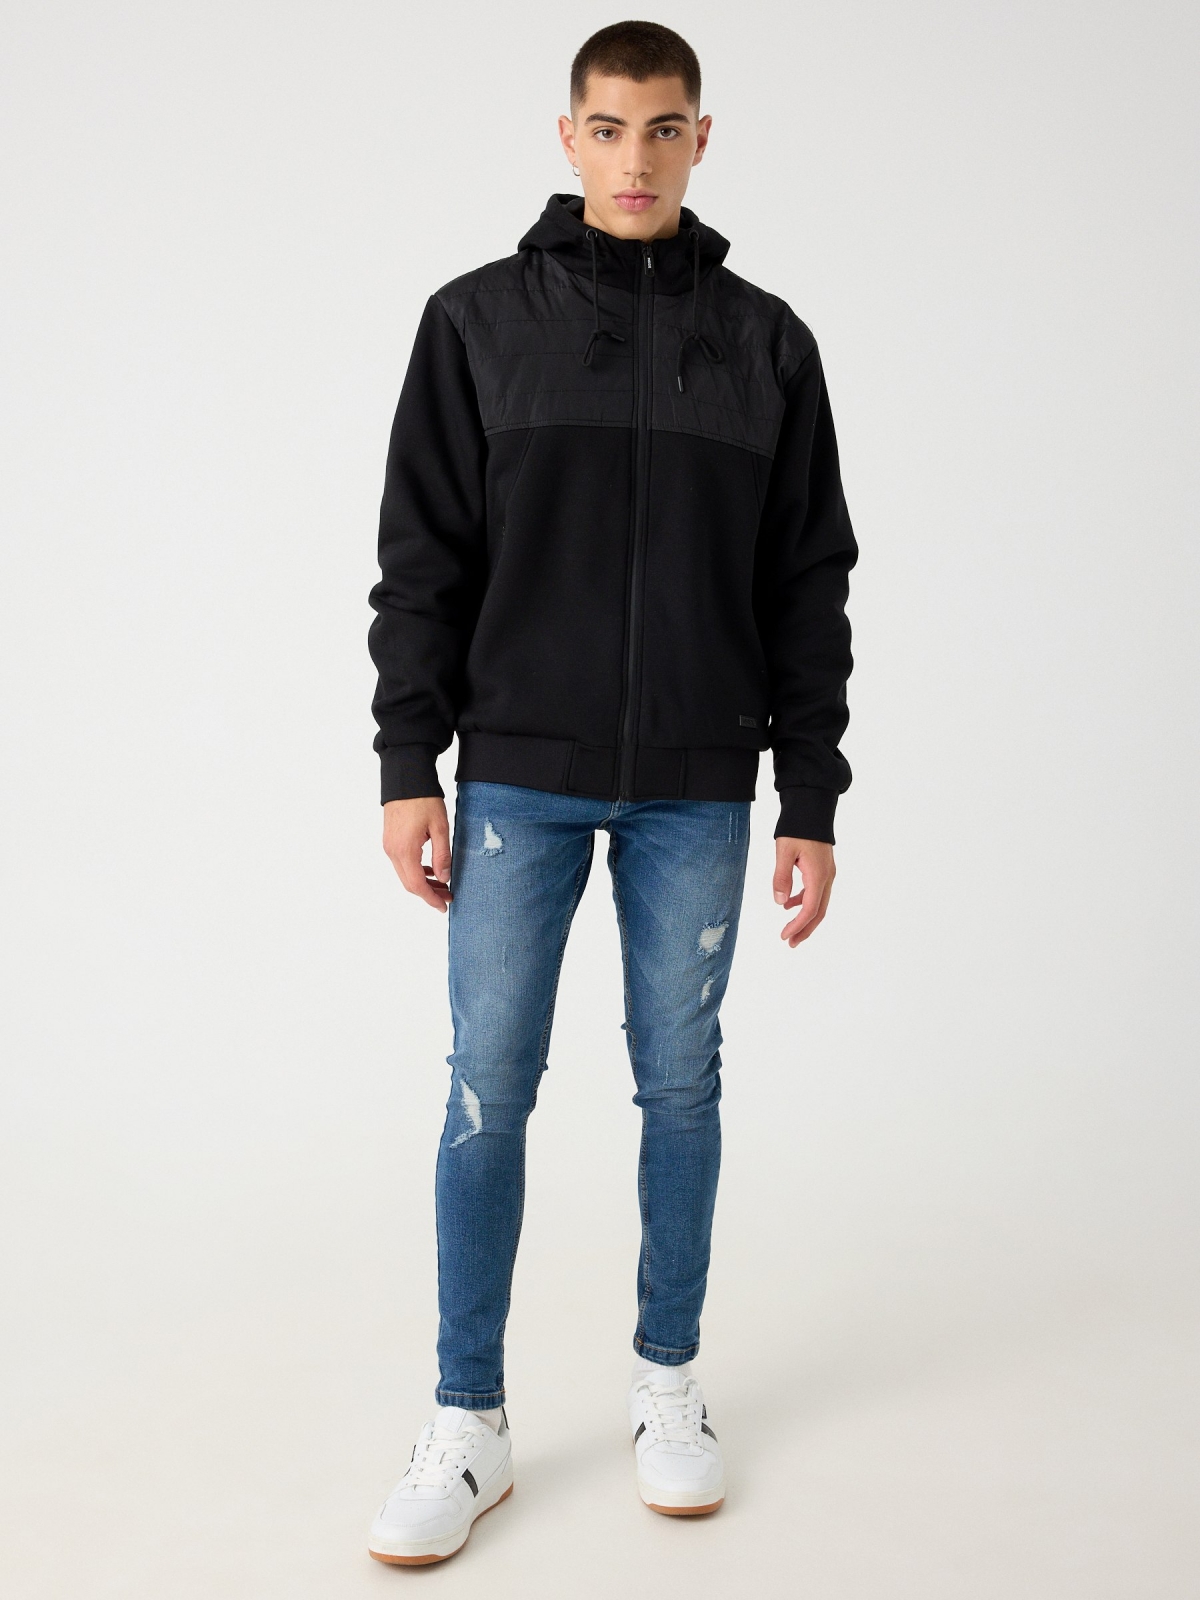 Combined hooded jacket black front view